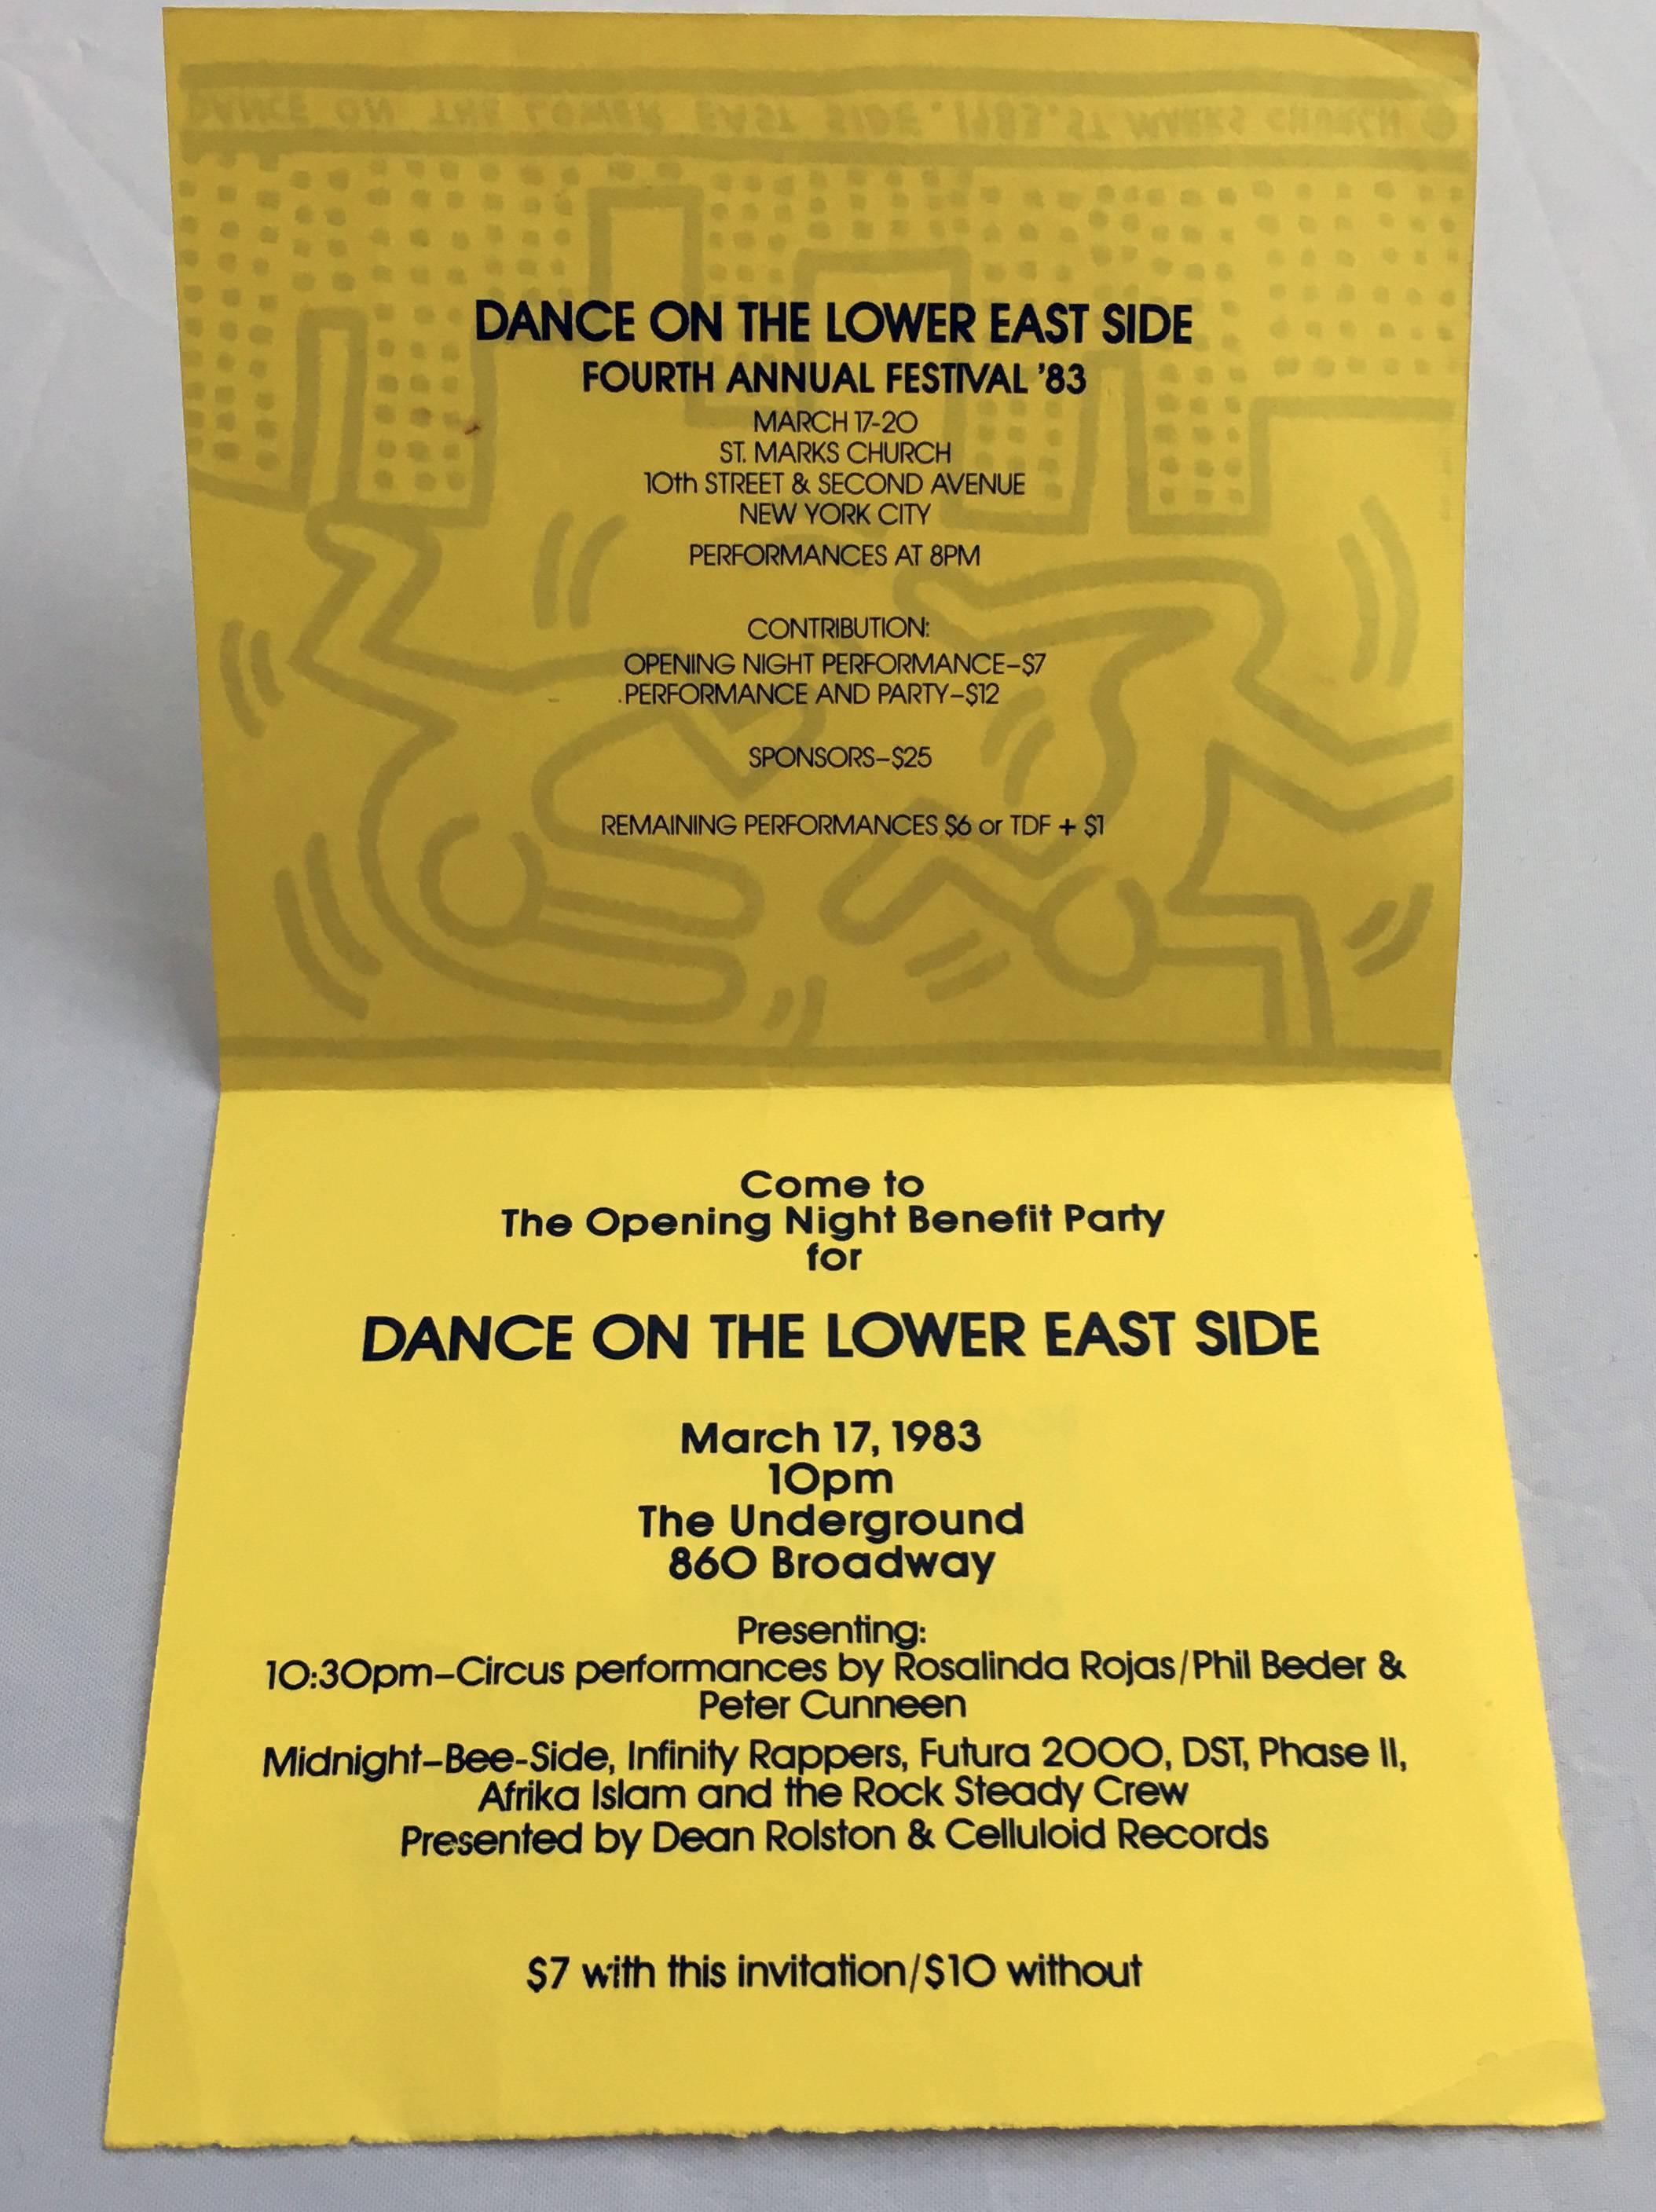 Dance on the Lower East Side (flyer)  - Pop Art Art by Keith Haring